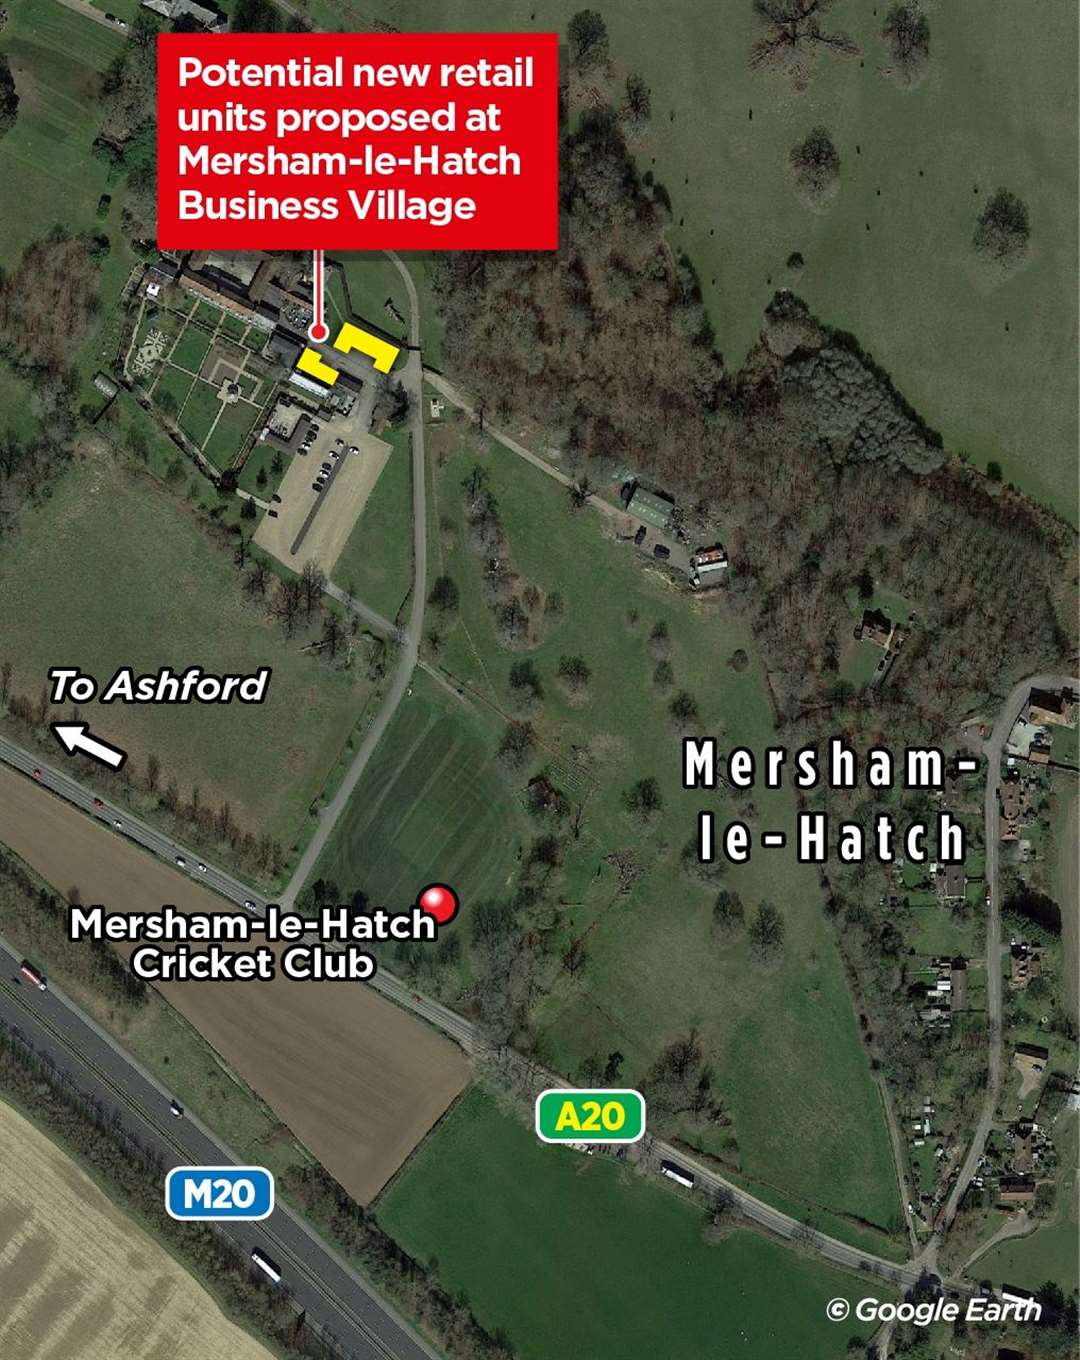 Mersham-le-Hatch Business Village is off the A20 near Junction 10a in Ashford. Picture: KMG